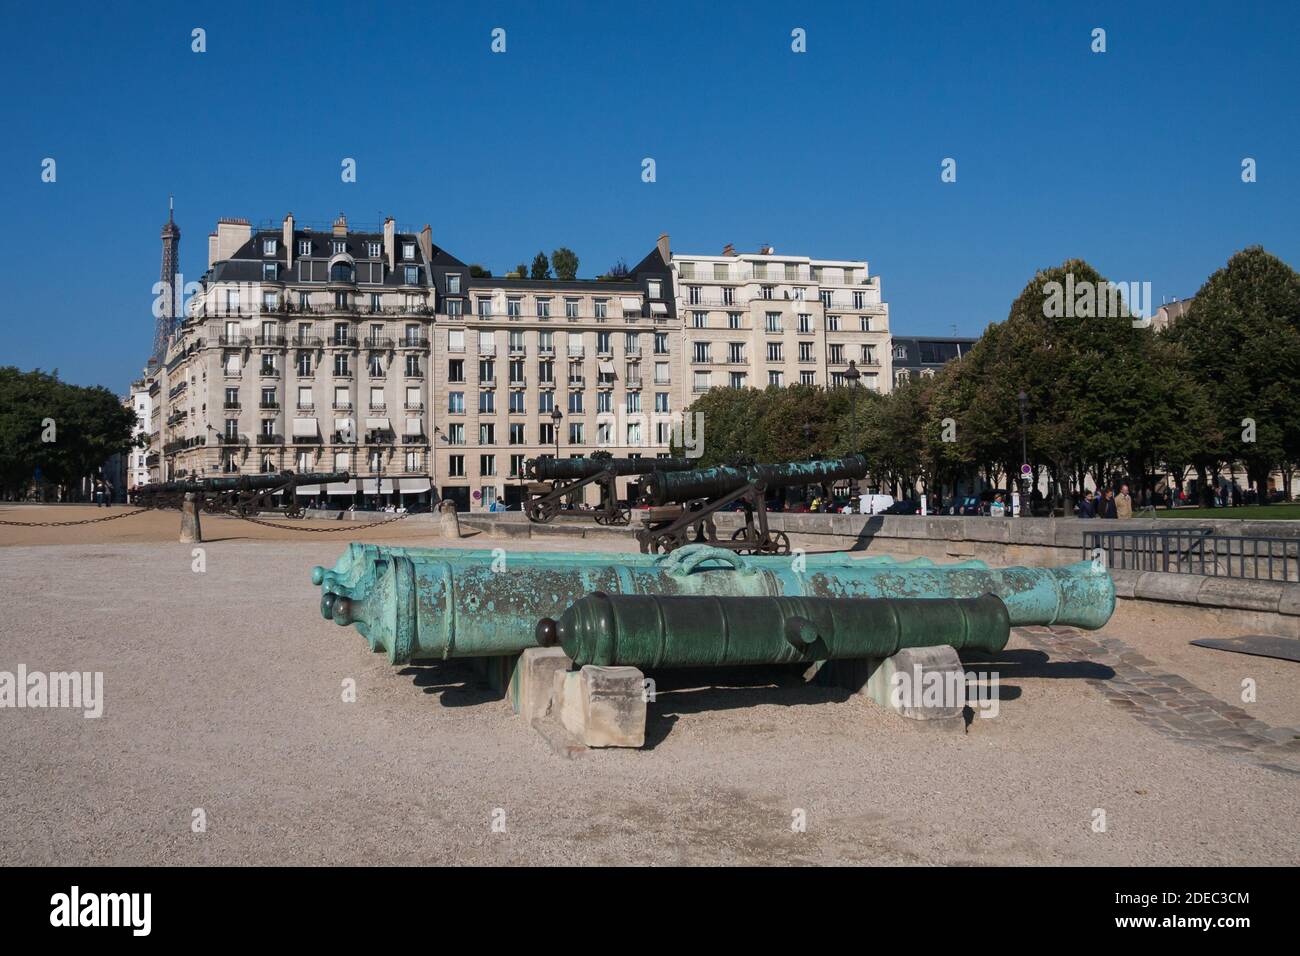 Paris, France Sept 27 2015: Outside of Hotel les Invalides (Invalids Residence) with view of cannons and Eiffel Tower. People are out enjoying Stock Photo